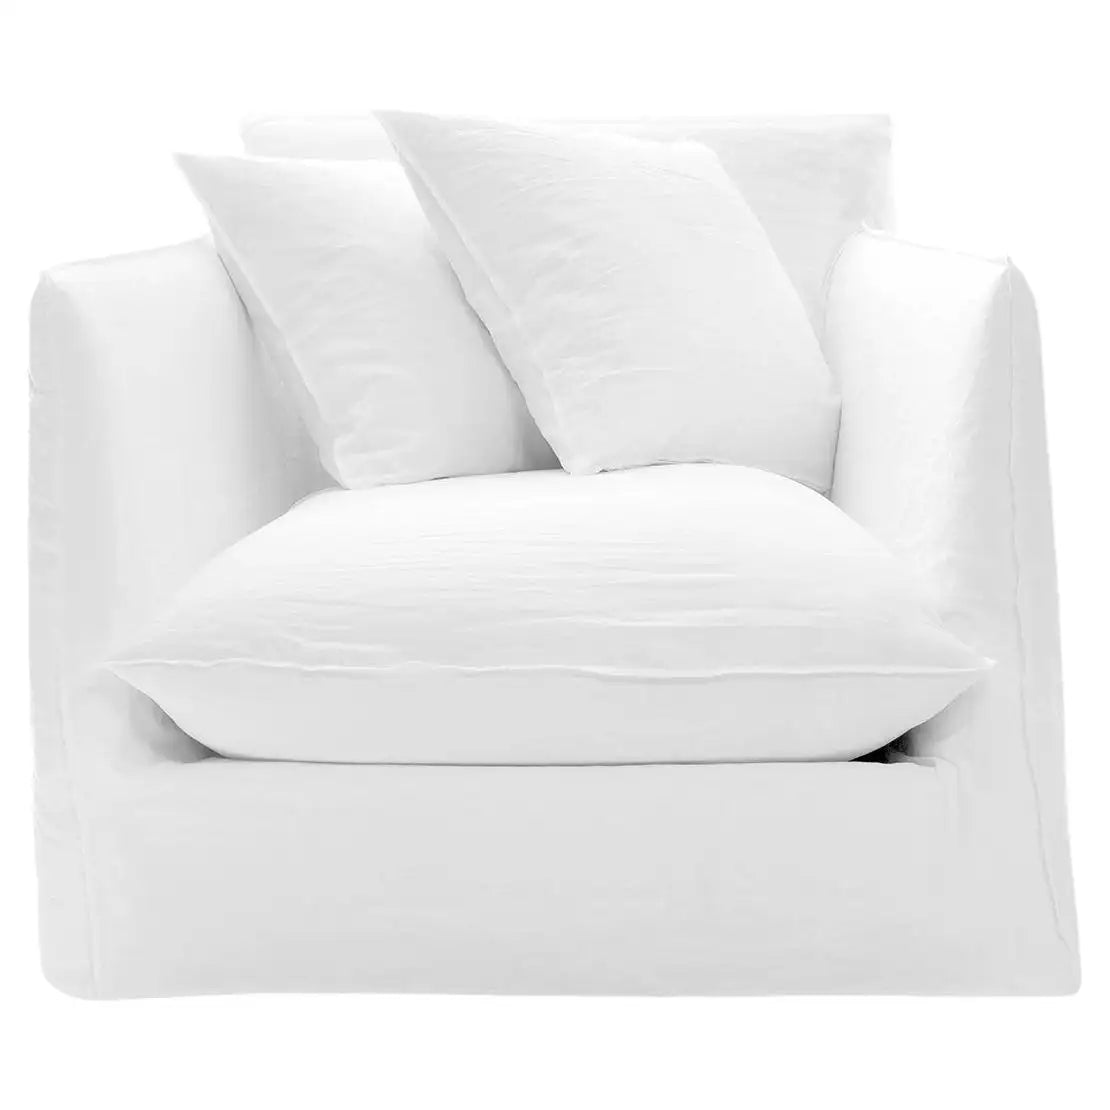 Gervasoni Ghost 01 Armchair in White Linen Upholstery by Paola Navone - $2,980.00